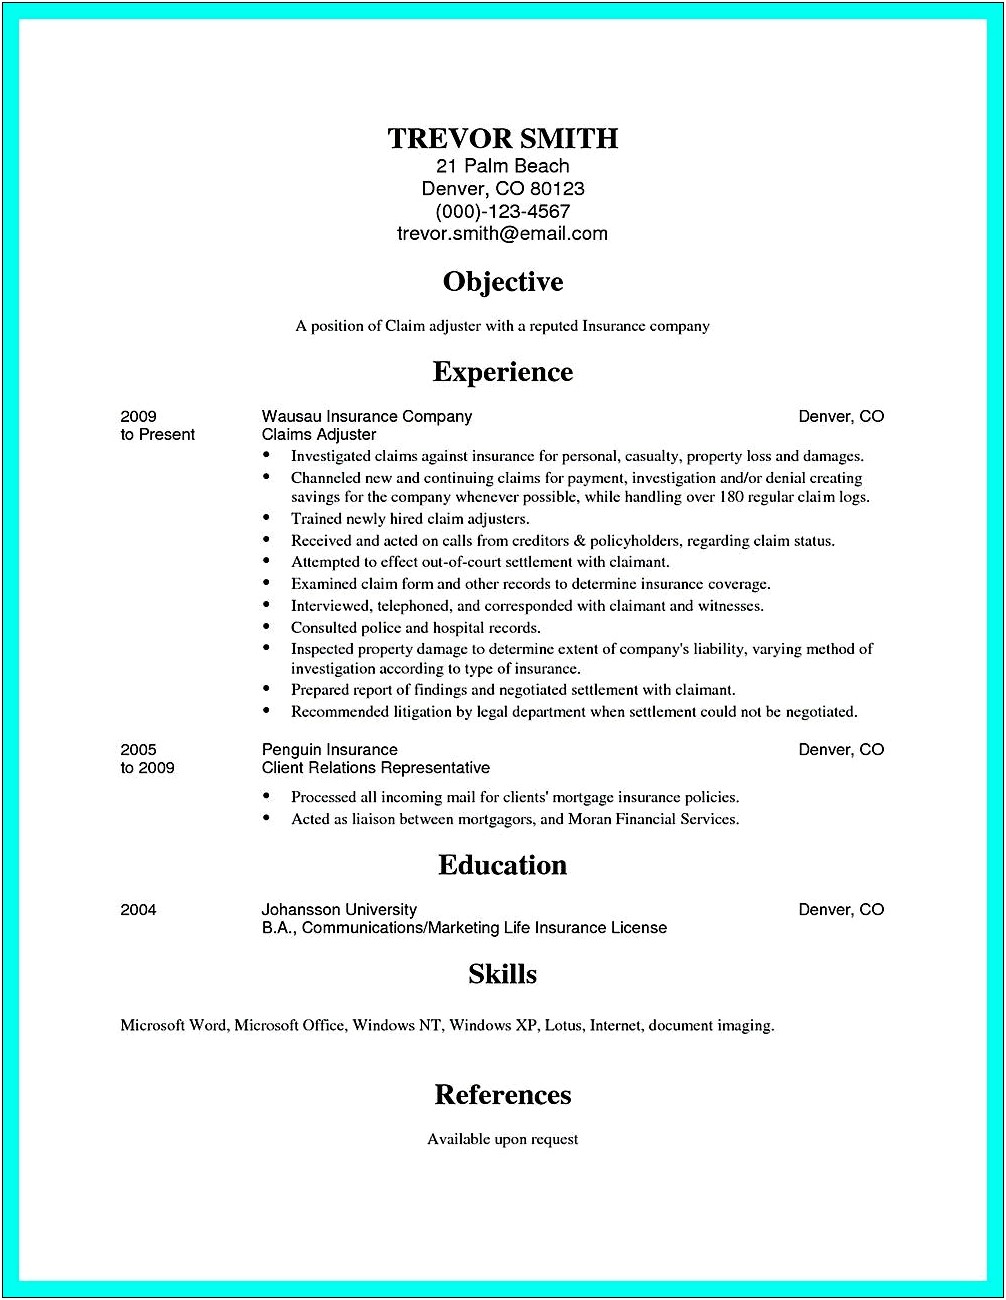 Sample Resume For Claims Adjusters